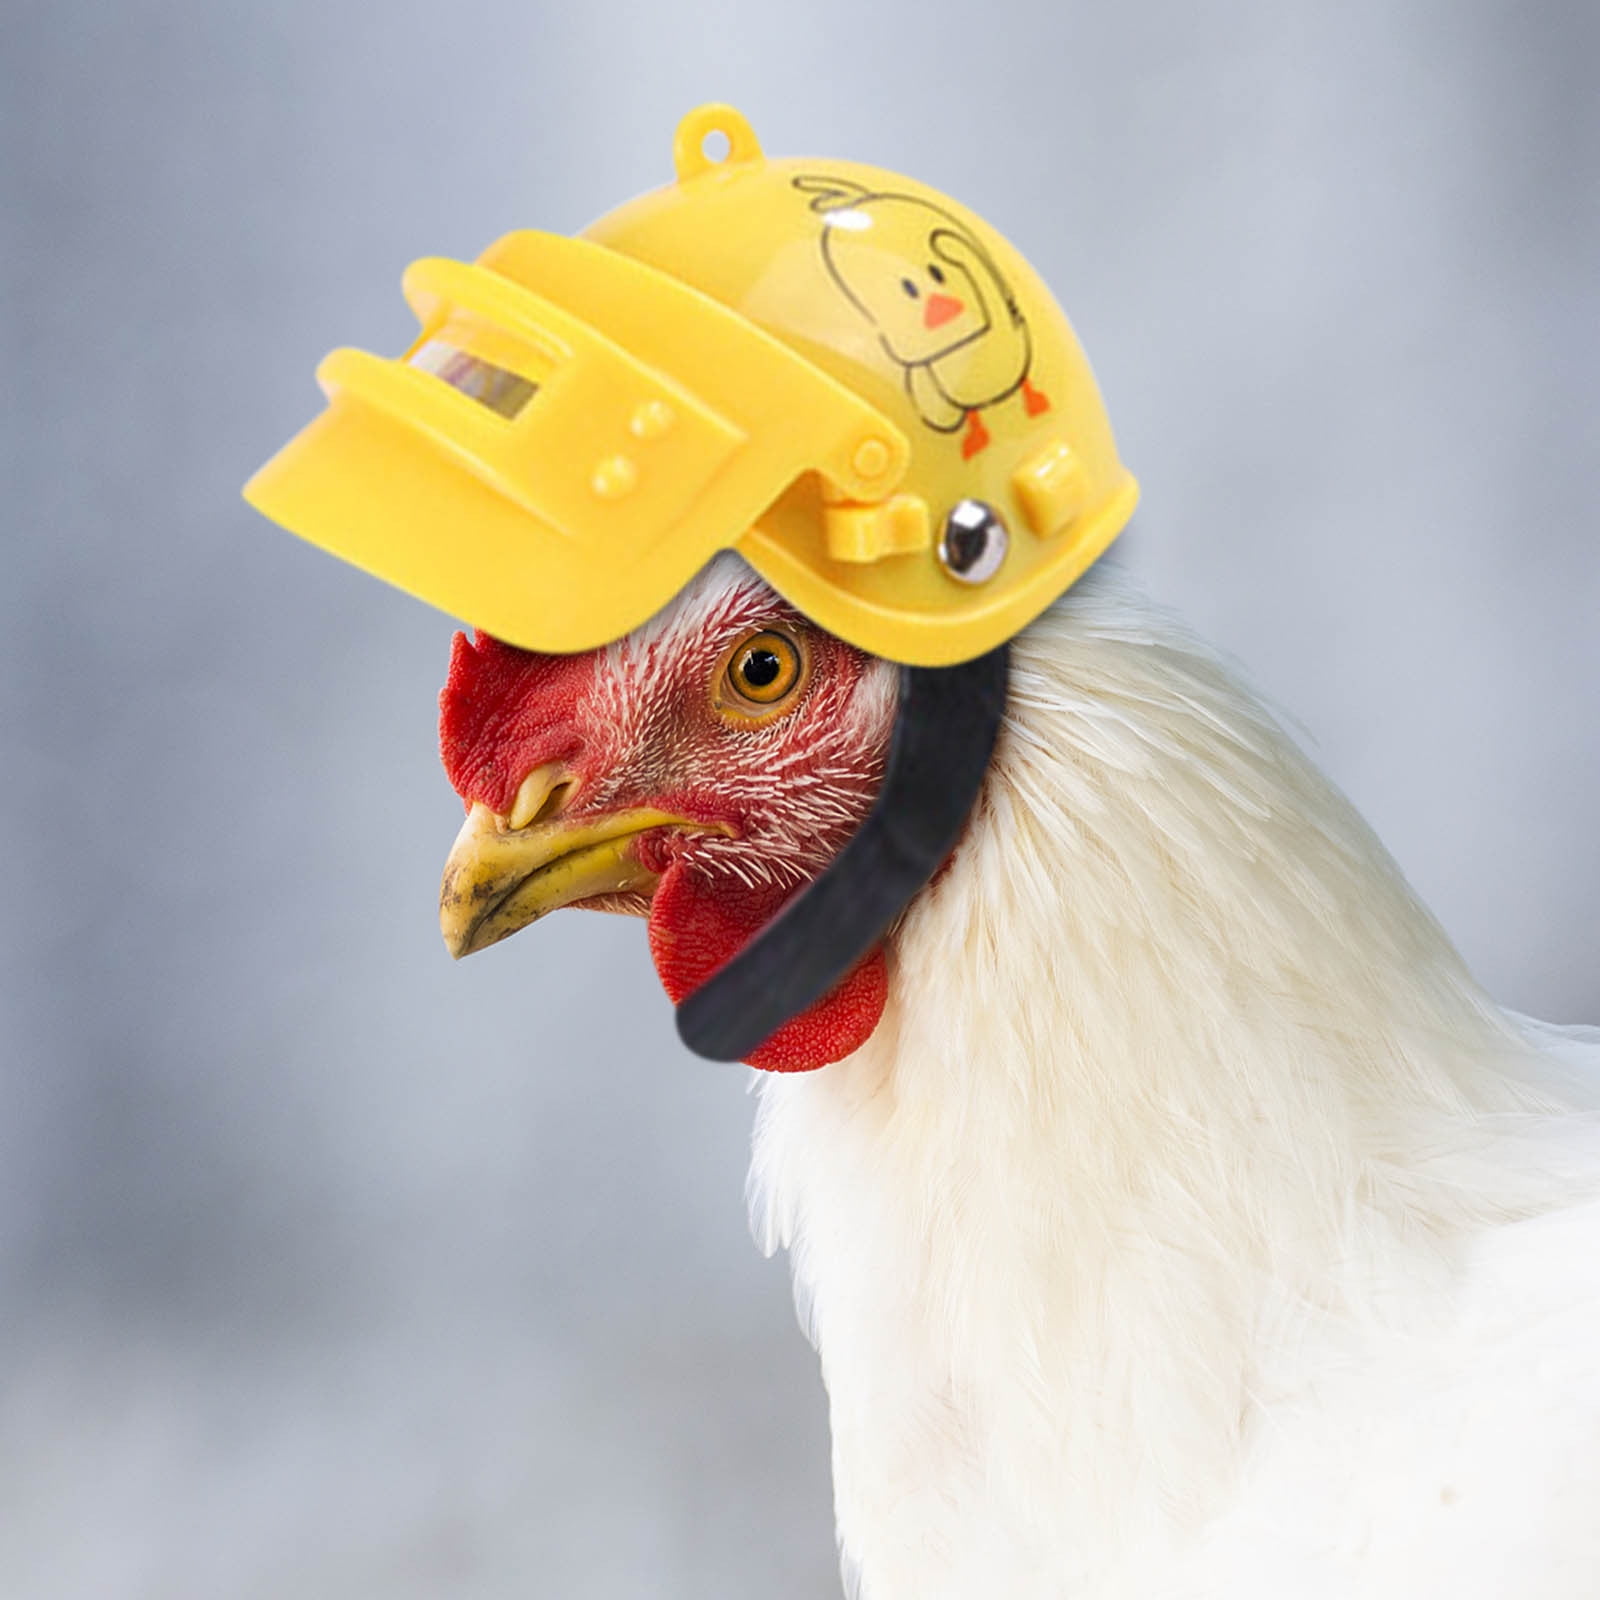 WQQZJJ Home Decor Clearance Pet Products Protection Chicken Helmet ...